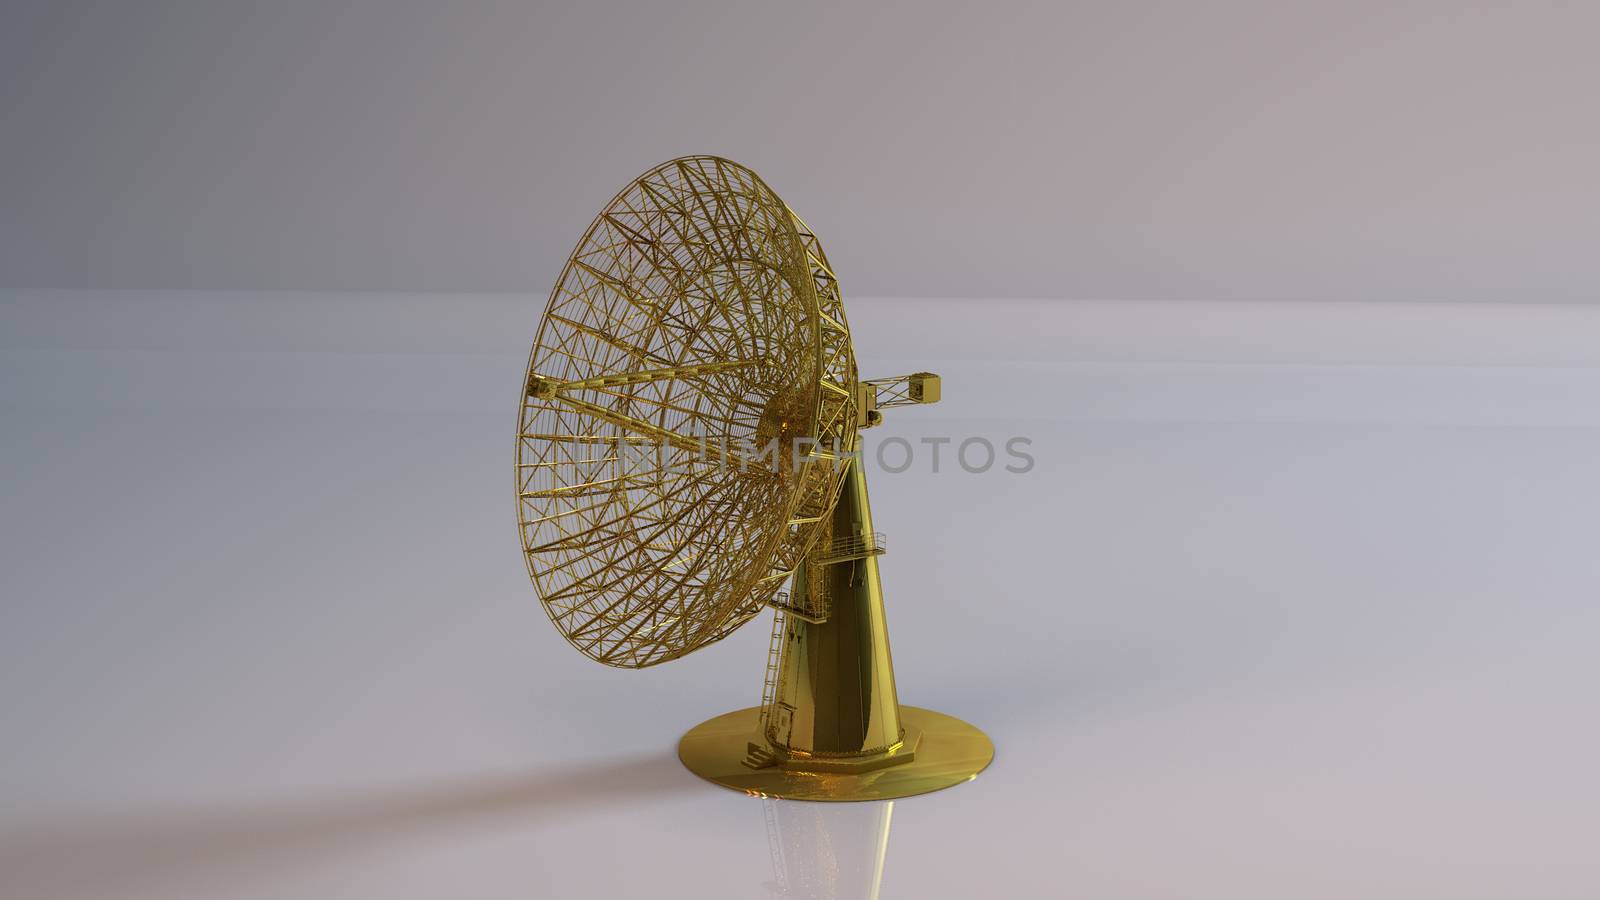 Golden 3D object (golden satellite) inside a white reflected stage with high render quality to be used as a logo, medal, symbol, shape, emblem, icon, business, geometric, label or any other use